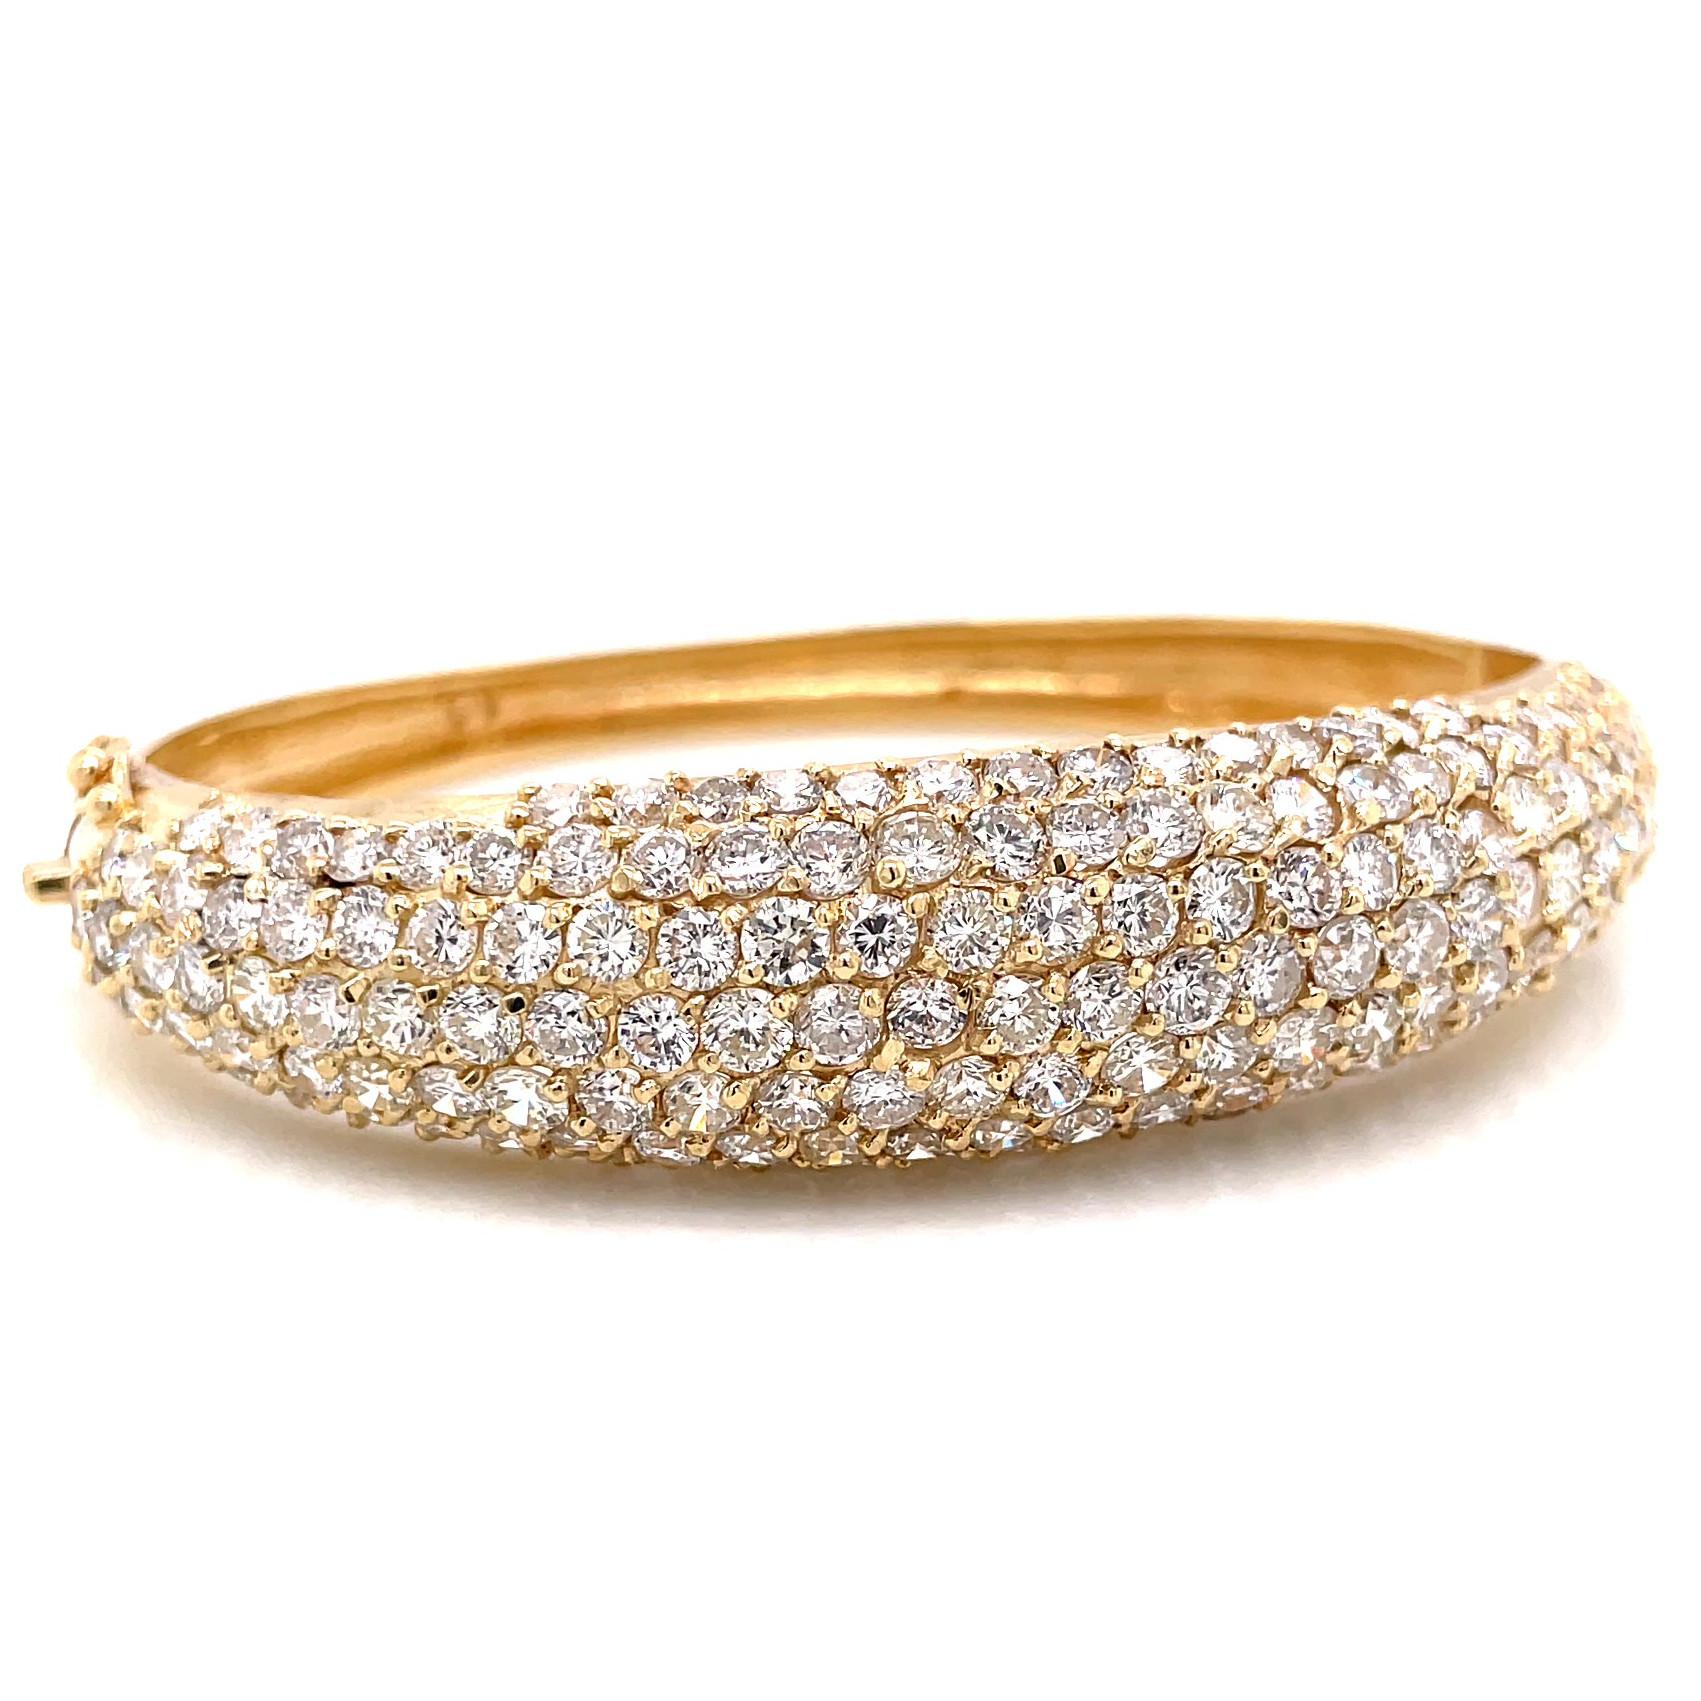 Micropave 11.50 Carat Round Brilliant Cut Diamonds 14 Karat Yellow Gold Bangle In Excellent Condition For Sale In Beverly Hills, CA